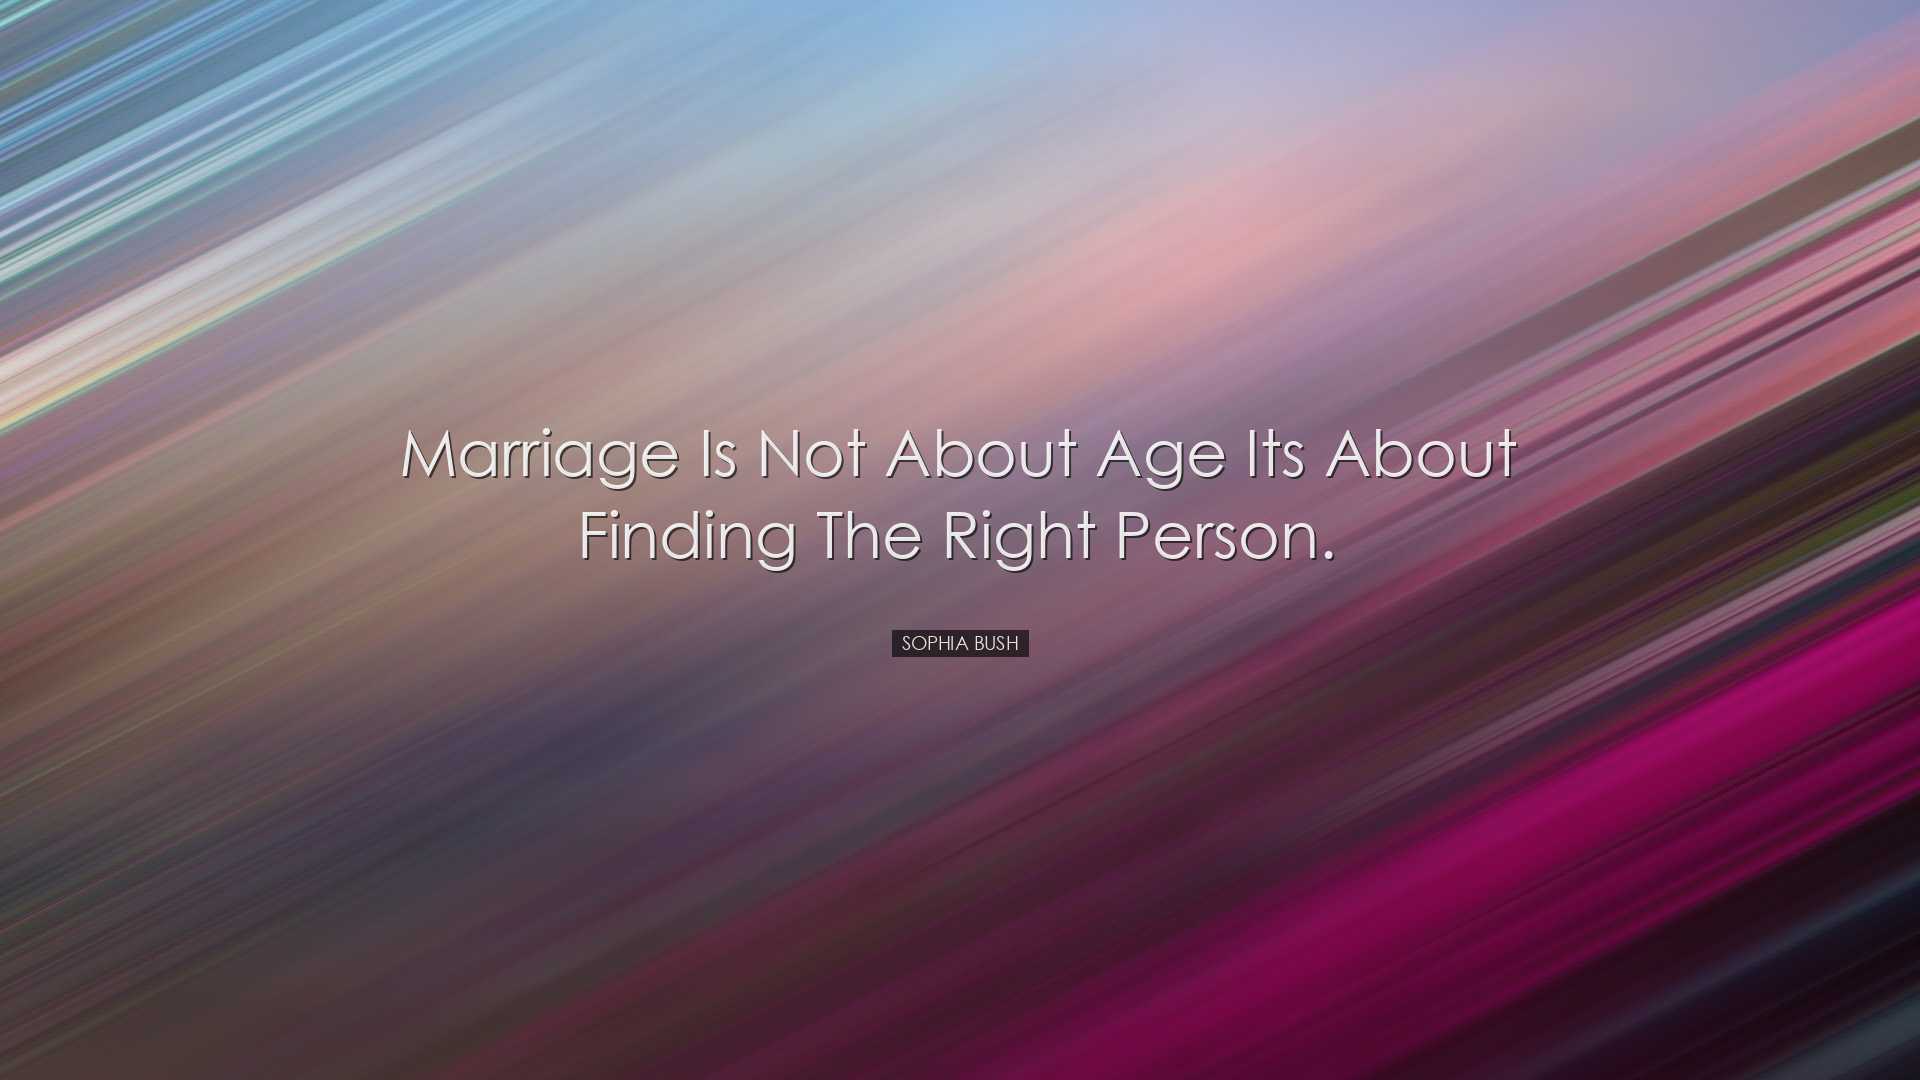 Marriage is not about age its about finding the right person. - So